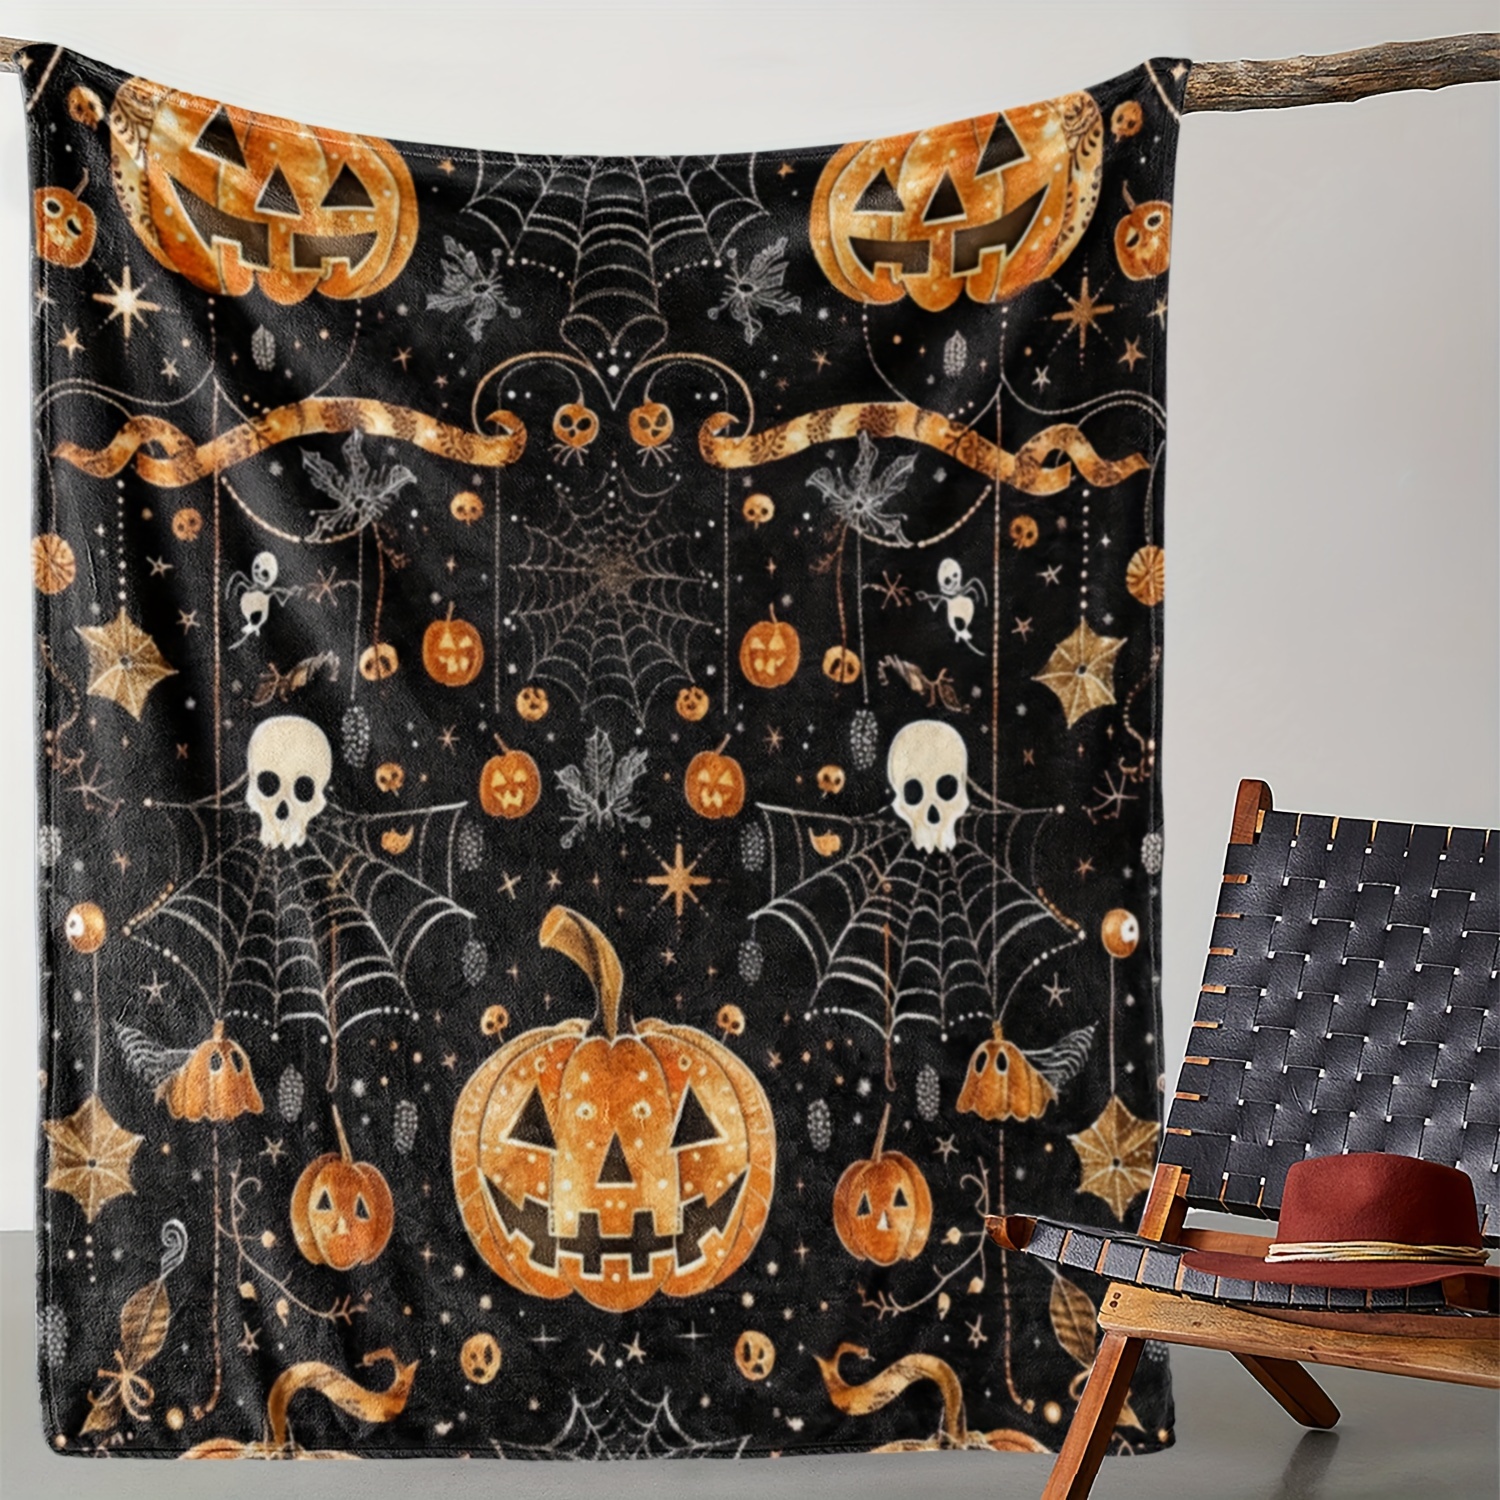 

Cozy Flannel Halloween Blanket - , Spider Web & Pumpkin Print | Soft, Warm Throw For Couch, Bed, Car, Office, Camping | All-season Gift